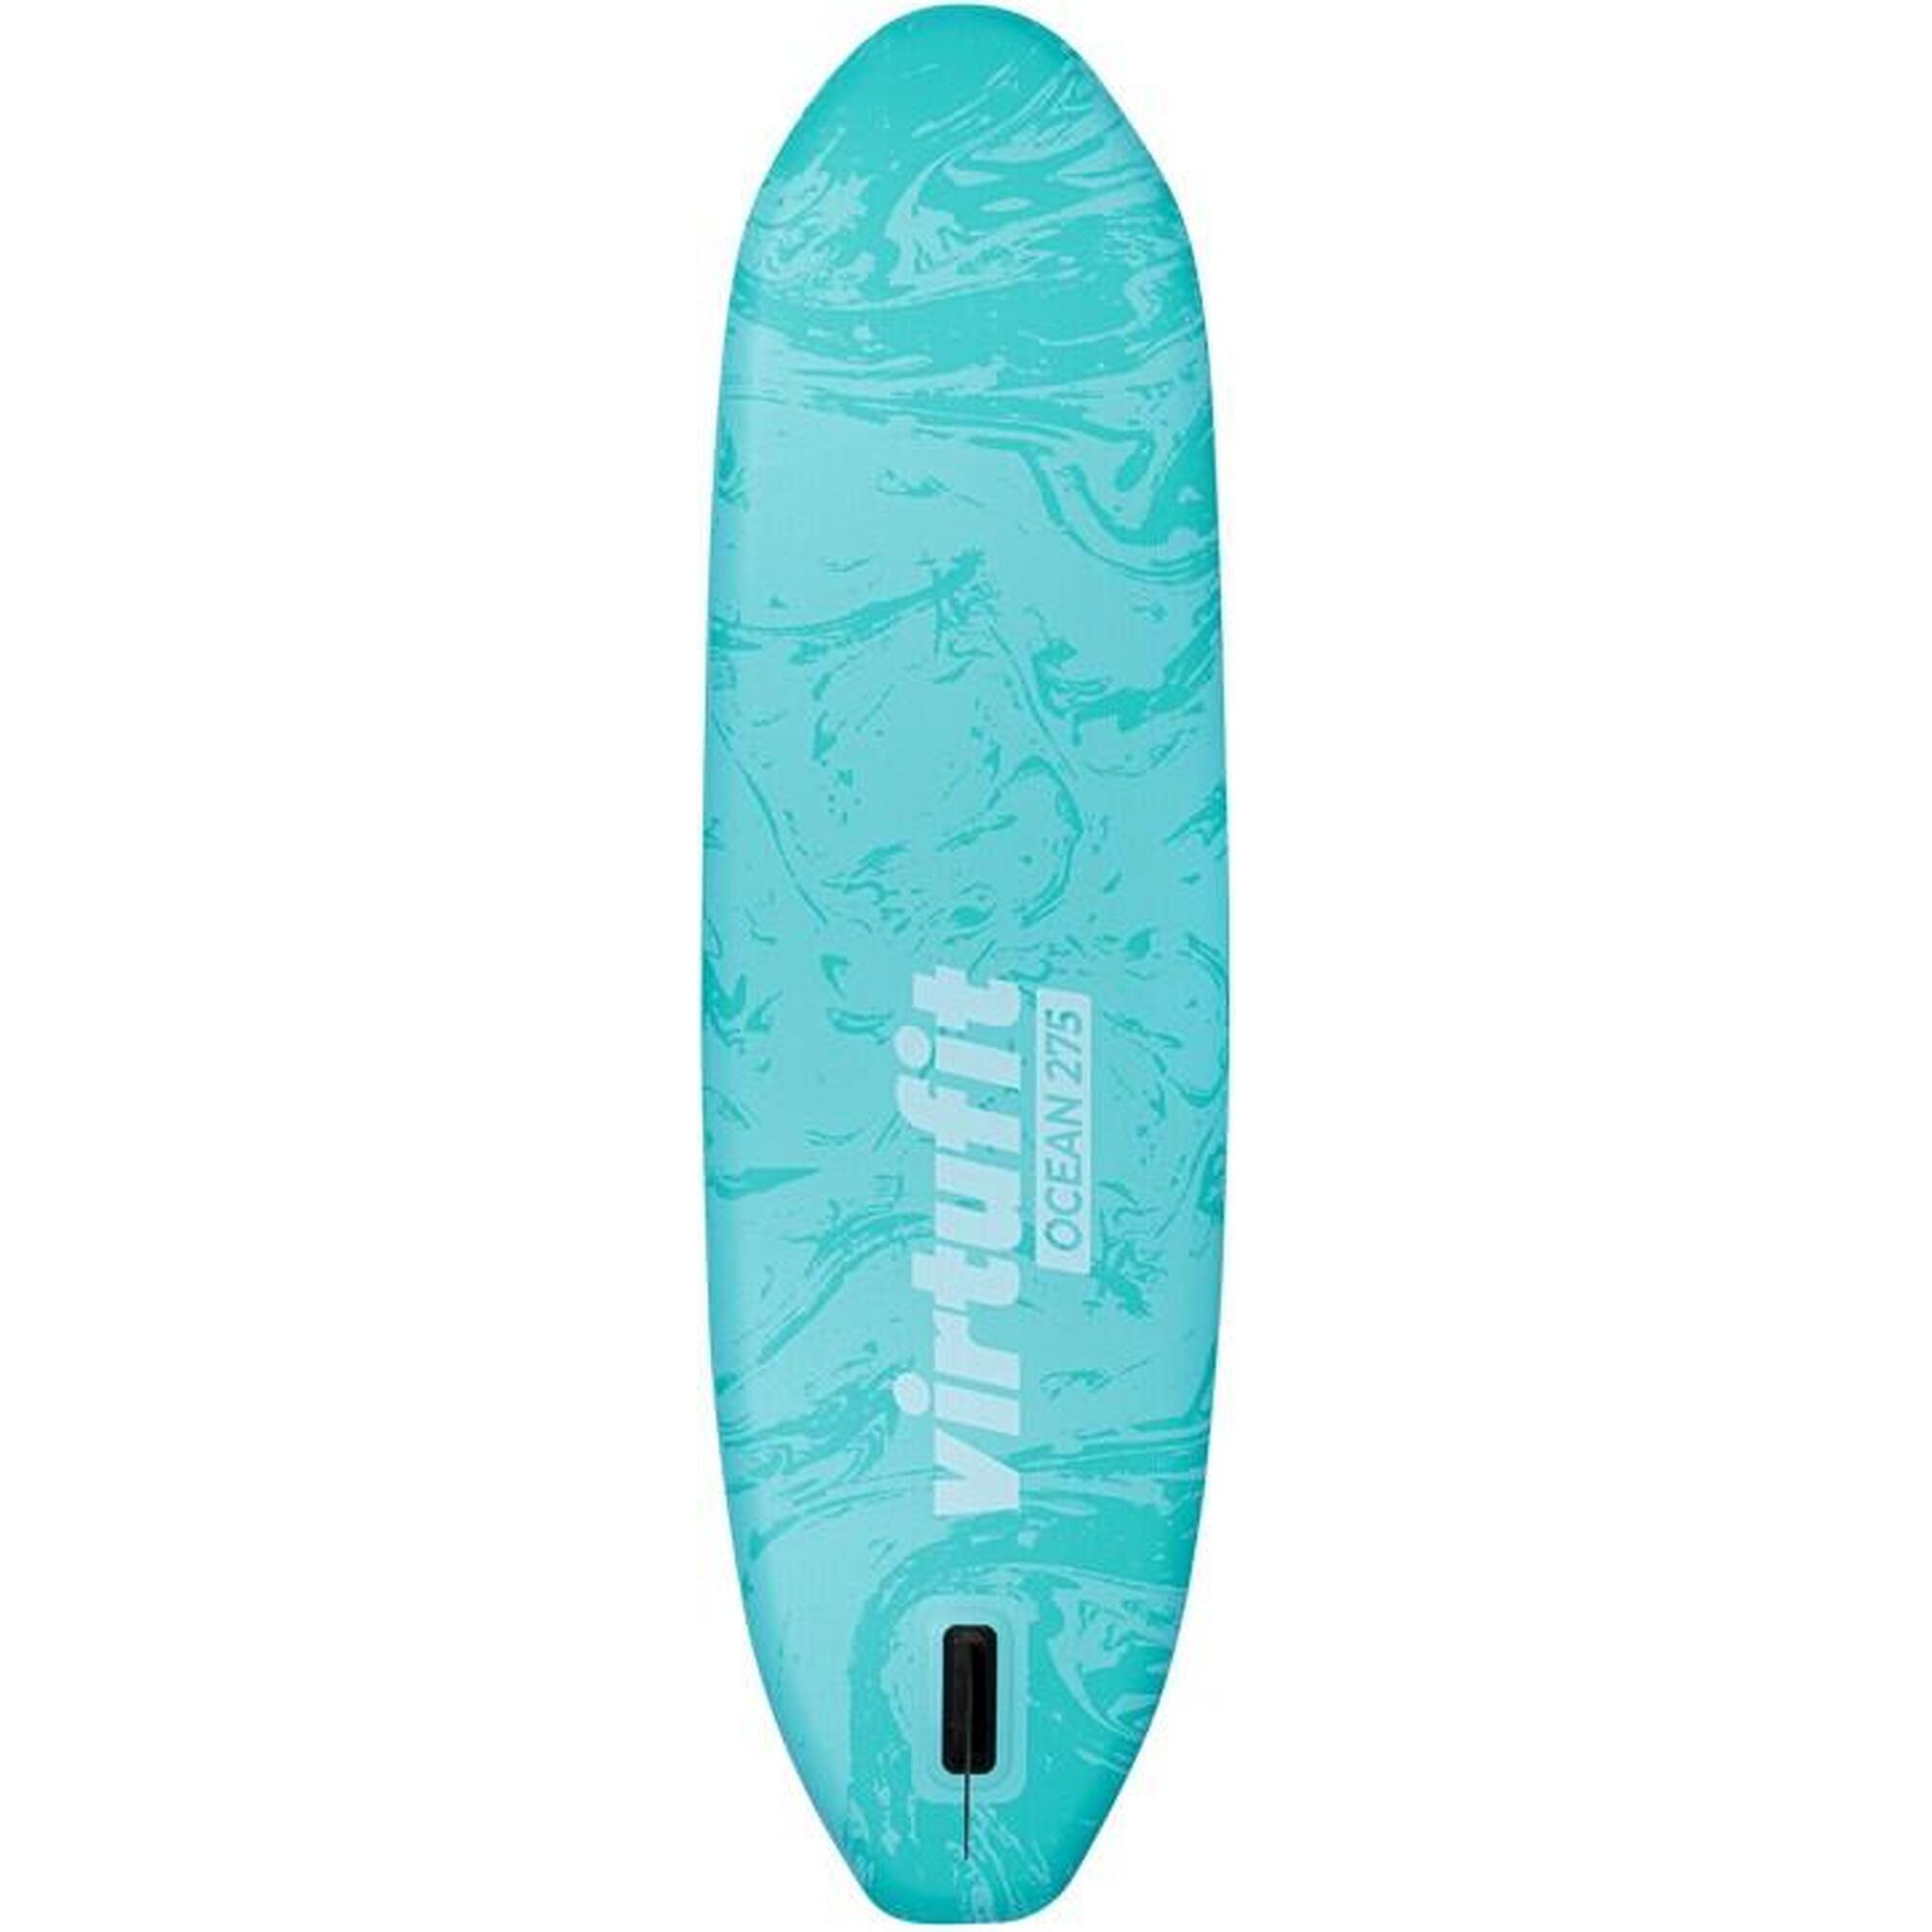 Stand up paddle - Ocean 275 - Turquoise - Avec accessoires